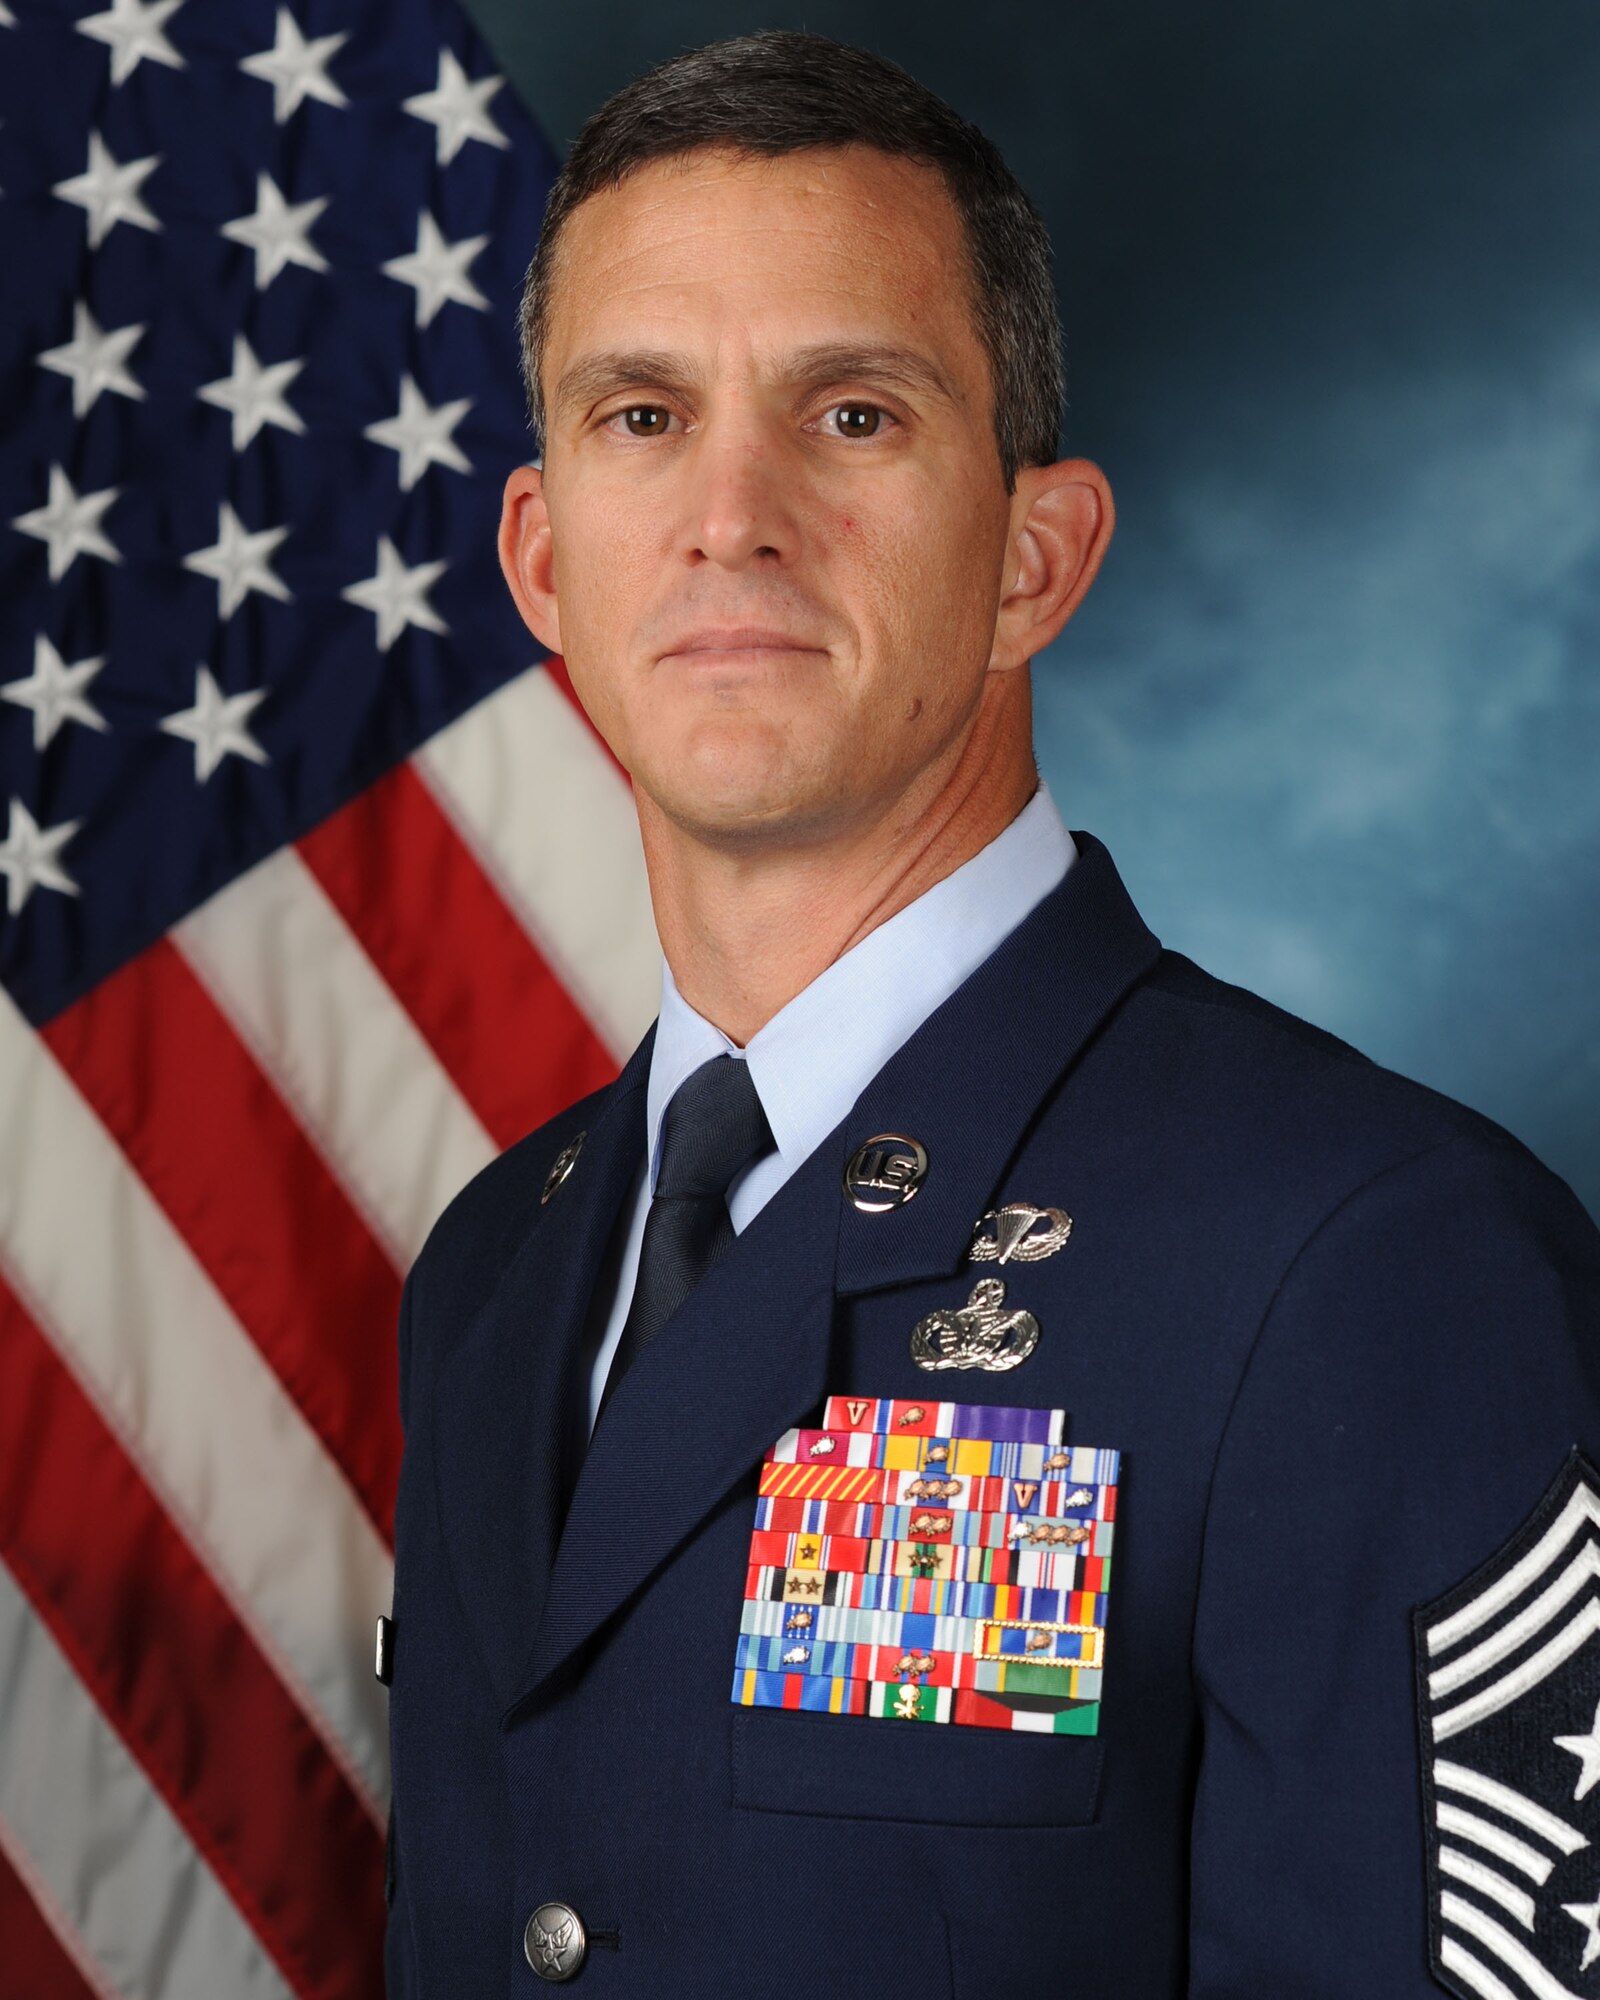 Chief Master Sgt. Richard A. Parsons is the Command Chief Master Sergeant, Air Combat Command, Langley Air Force Base, Va. In this position, he is the enlisted advisor to the commander and staff for the enlisted force stationed at 27 wings, 17 bases and at more than 200 operating locations around the world. (U.S. Air Force photo/Released)